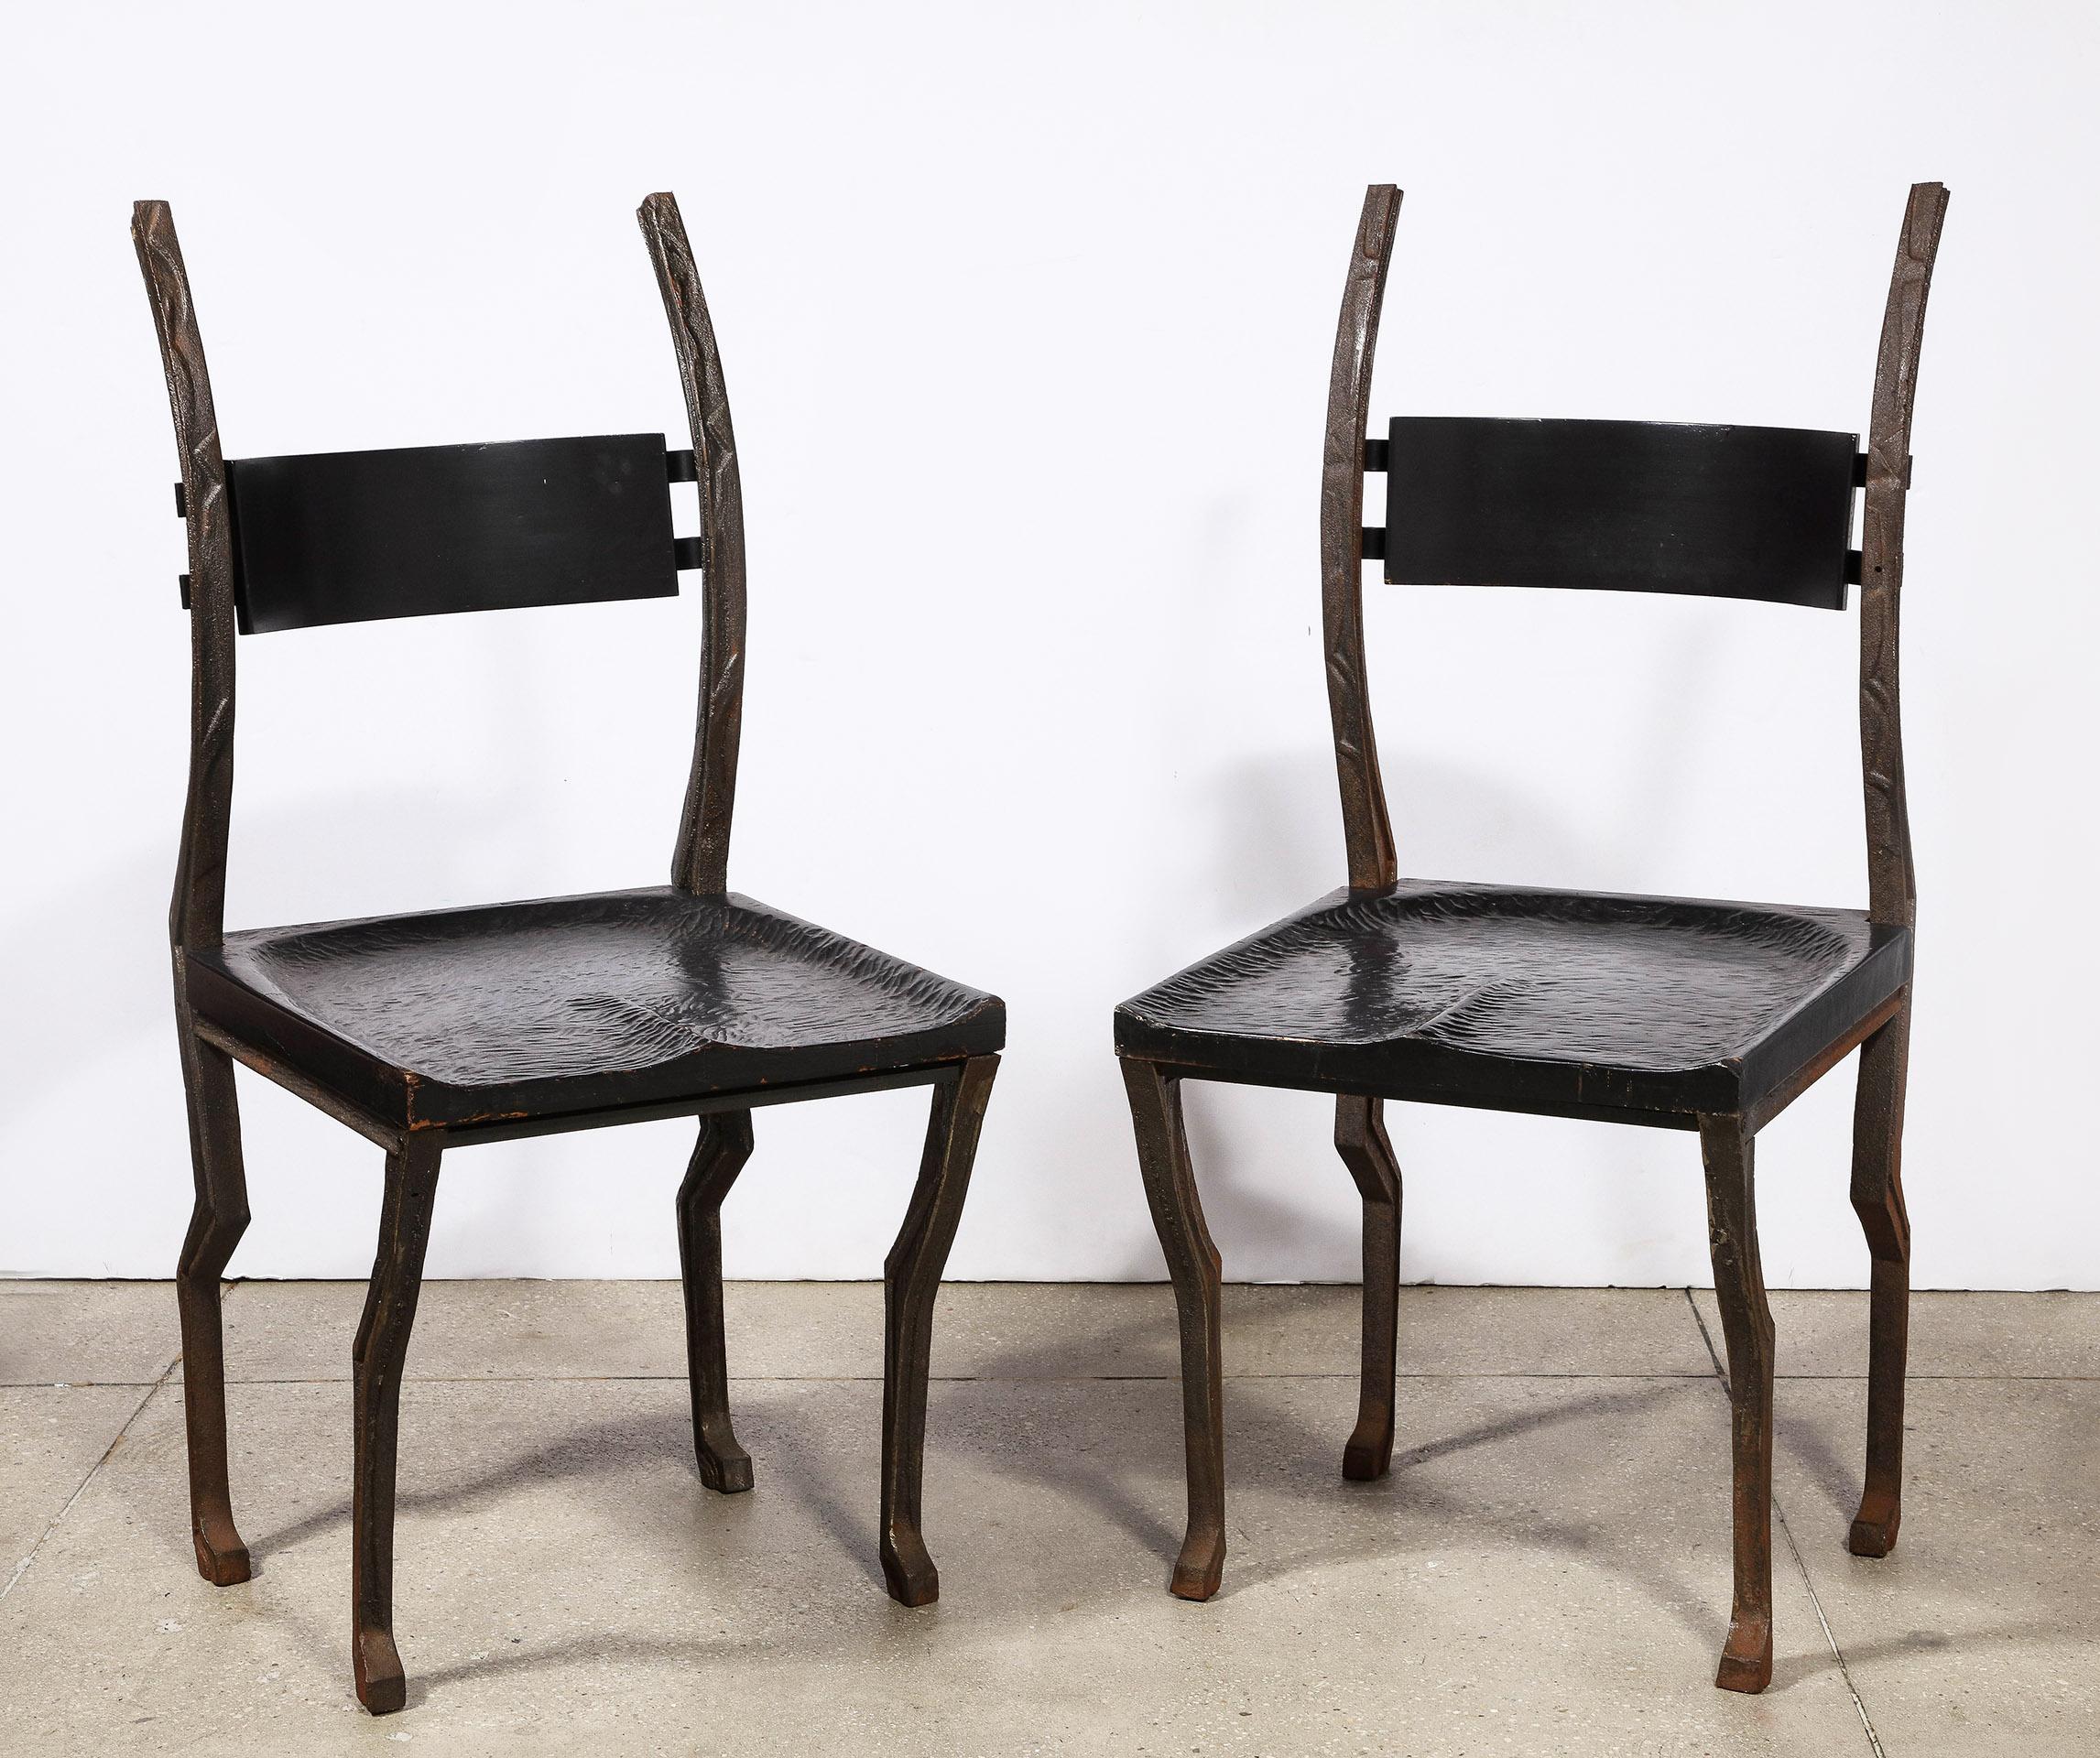 The rare sculpted chair constructed of forged steel with a hand-carved seat and back splat.